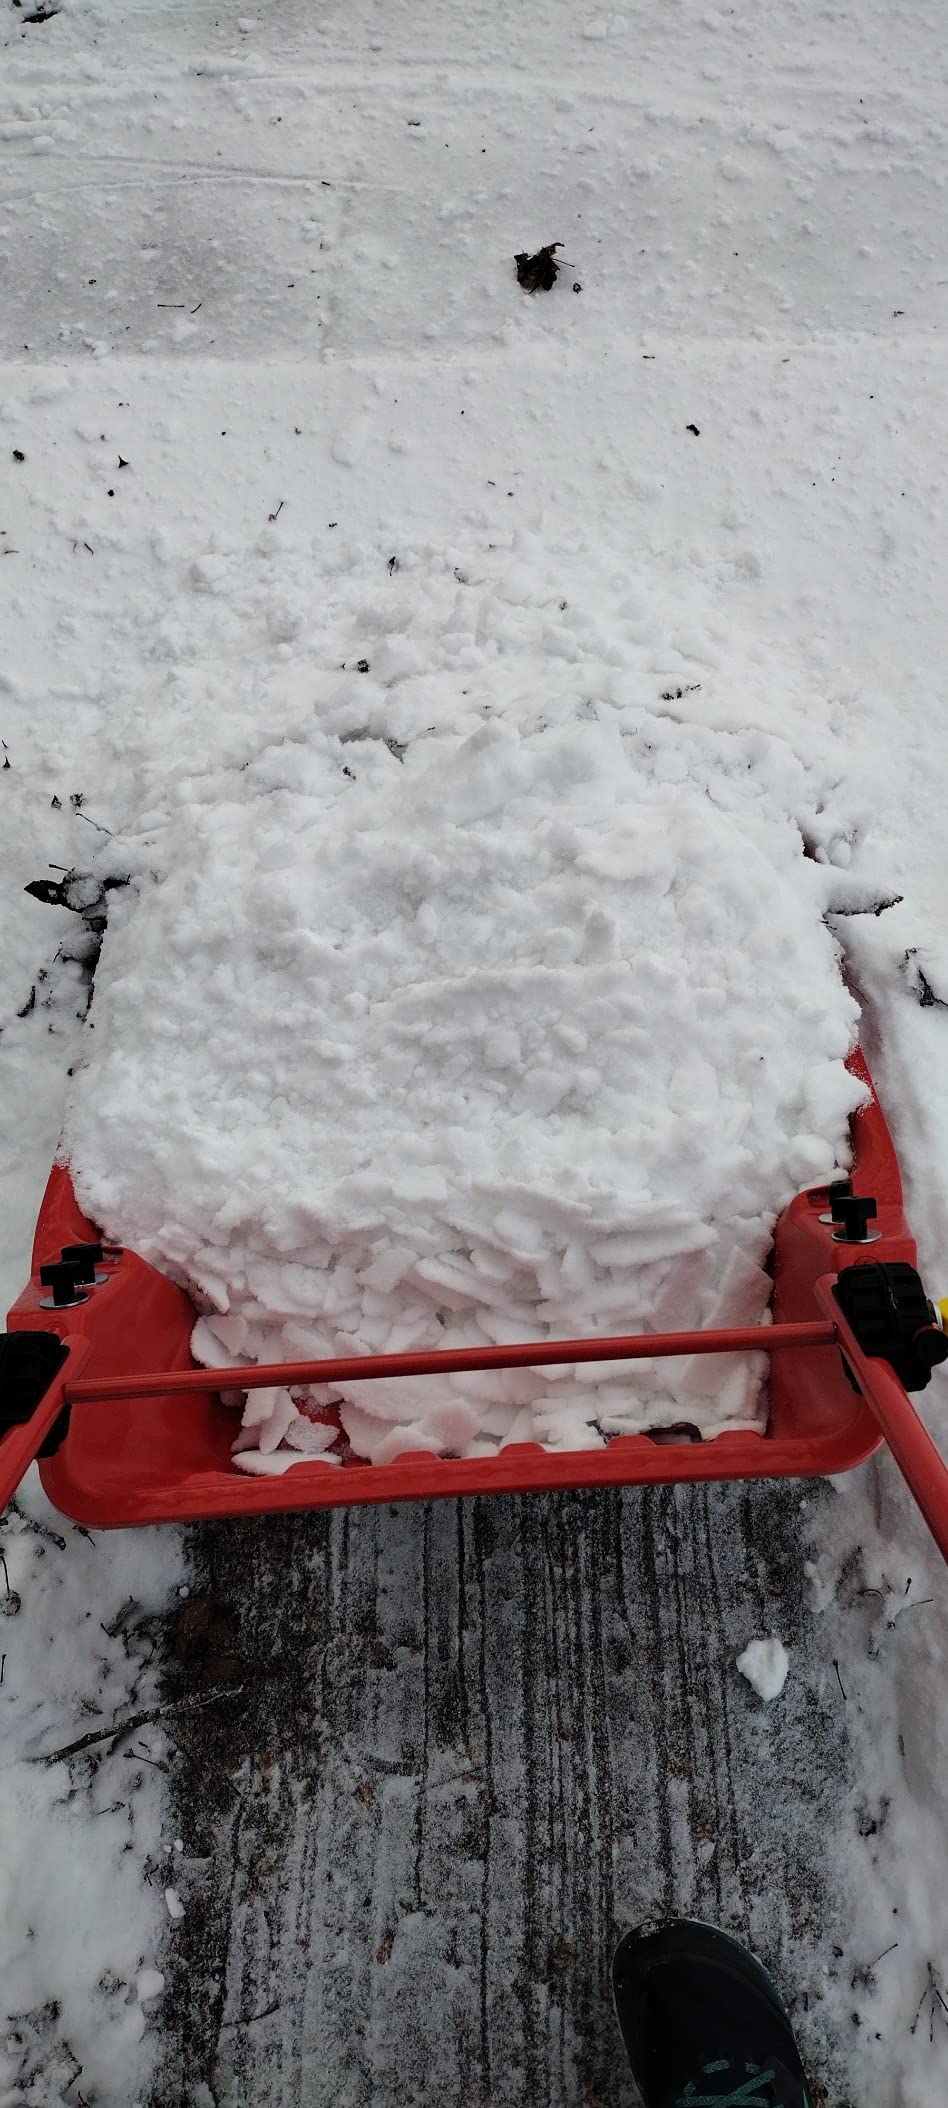 Shoveling snow more efficiently